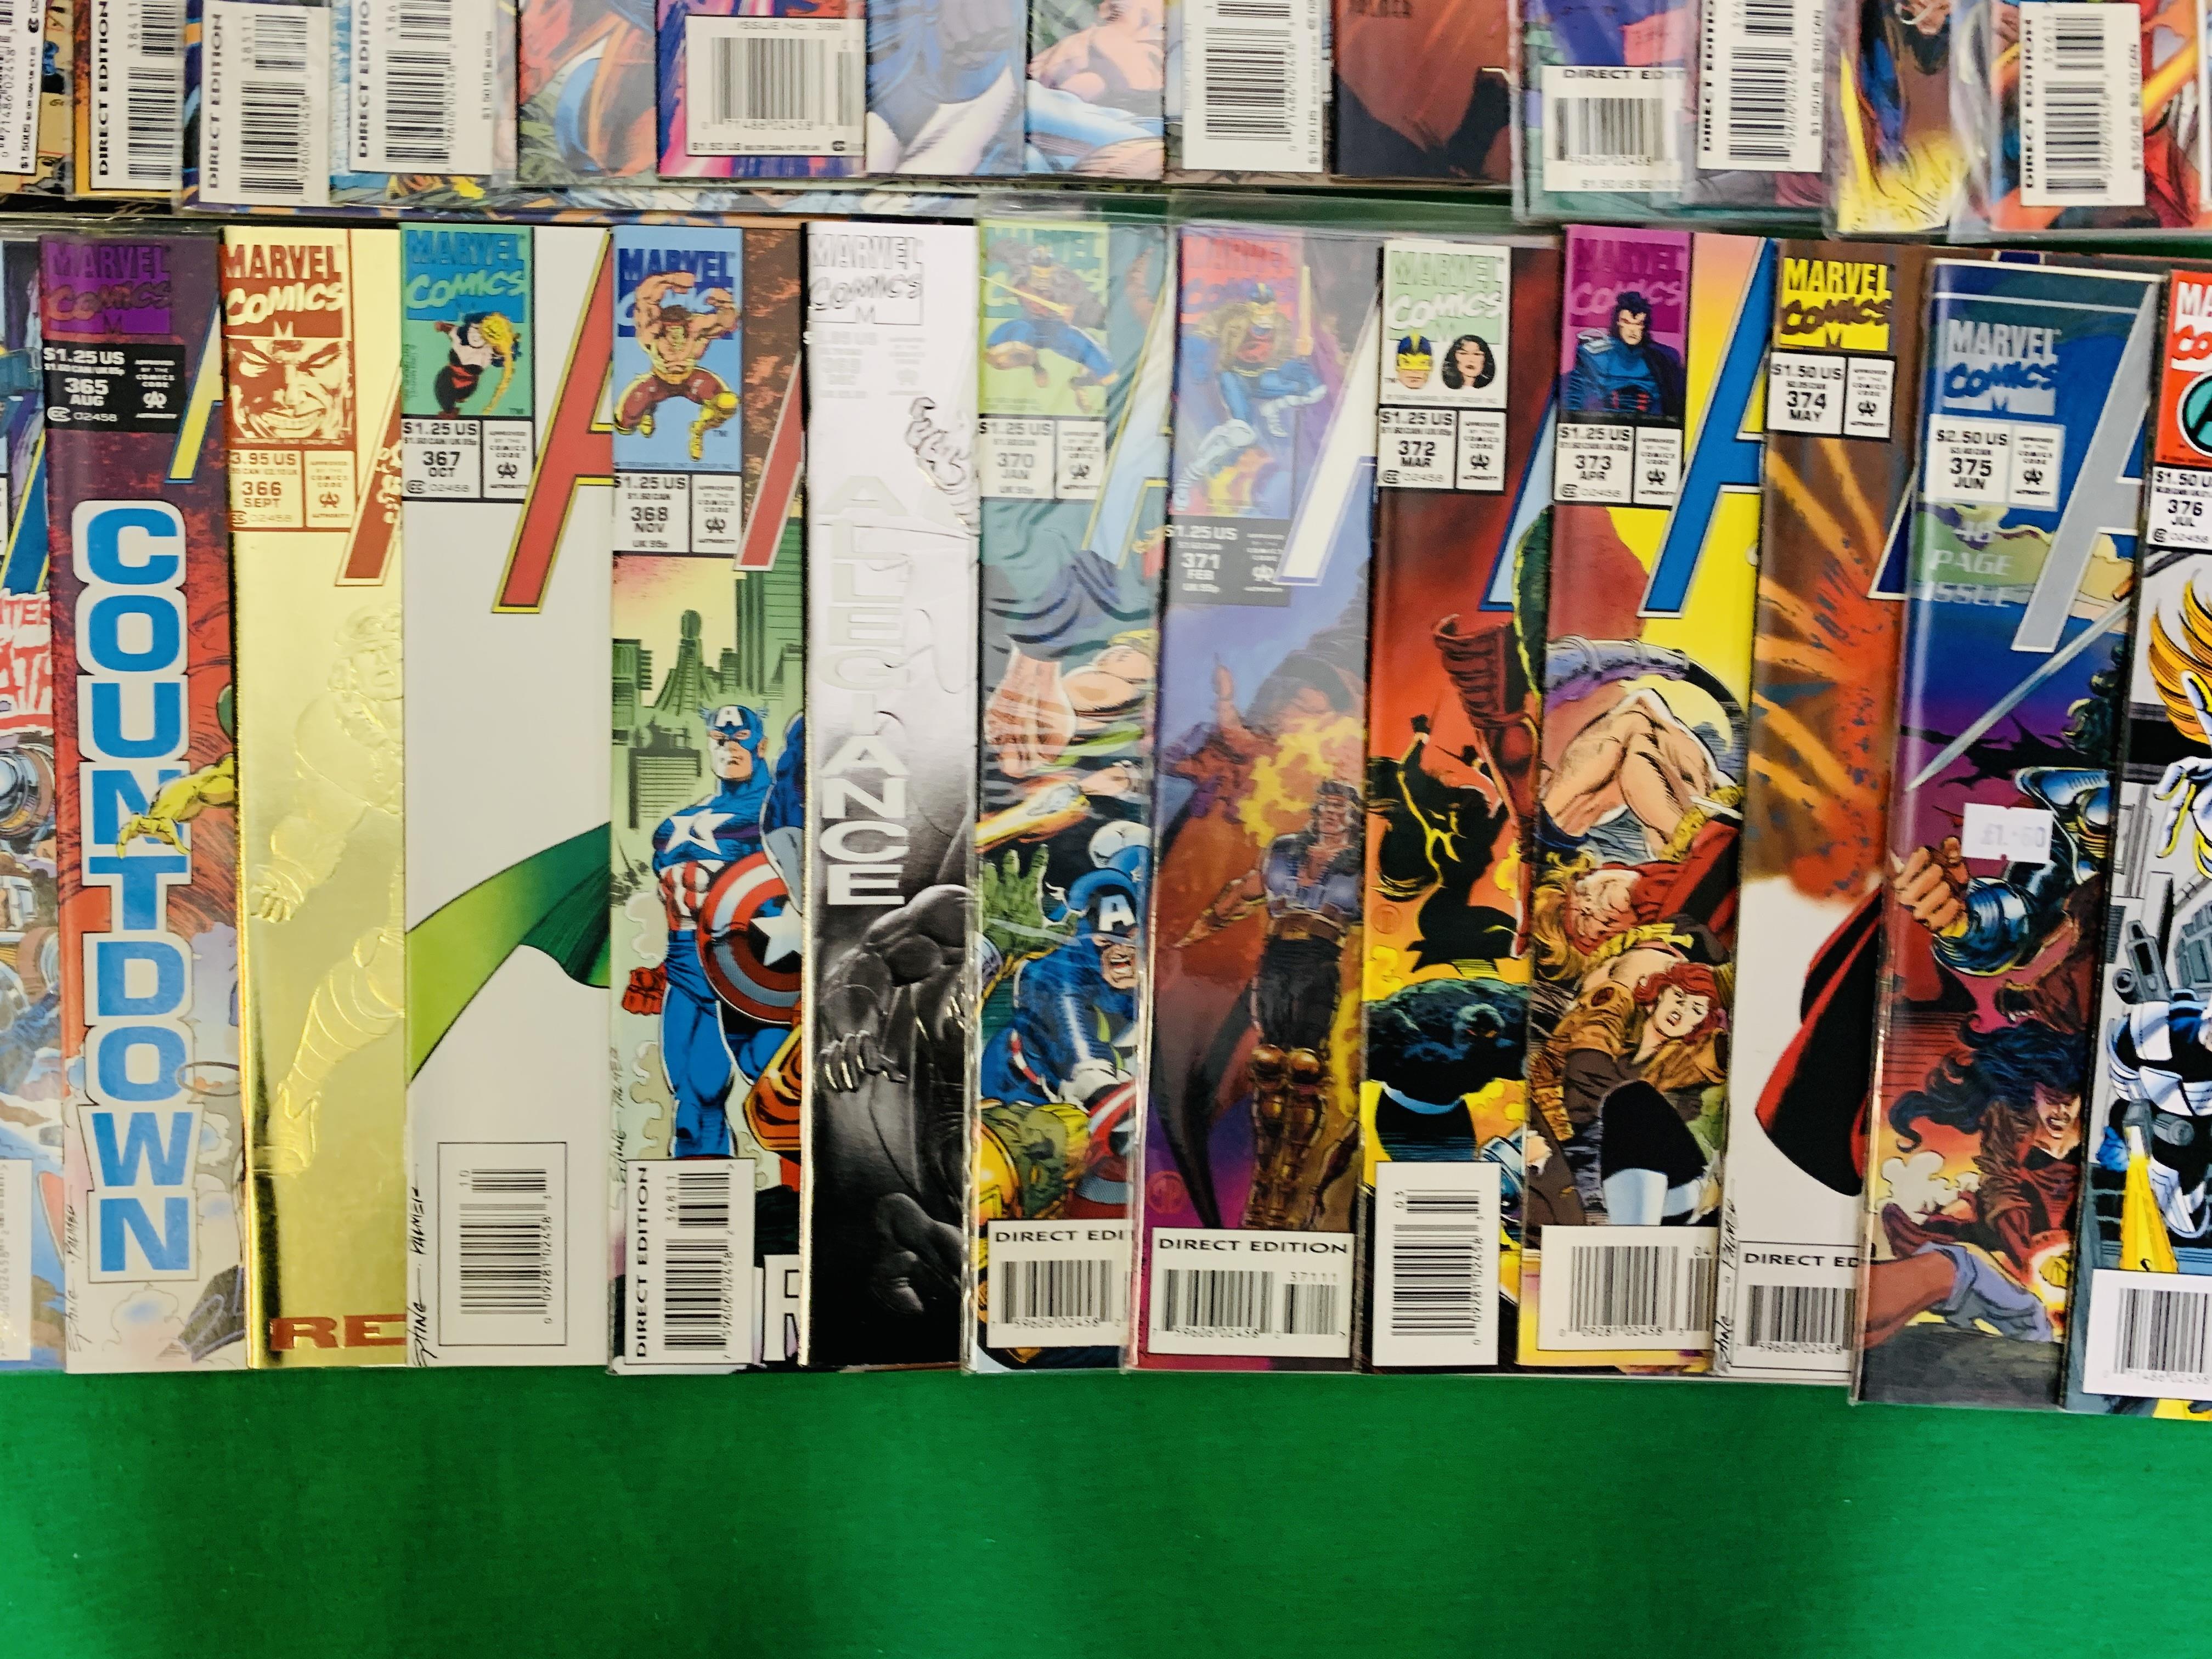 MARVEL COMICS THE AVENGERS NO. 300 - 402, MISSING ISSUES 325, 329 AND 334. - Image 12 of 16